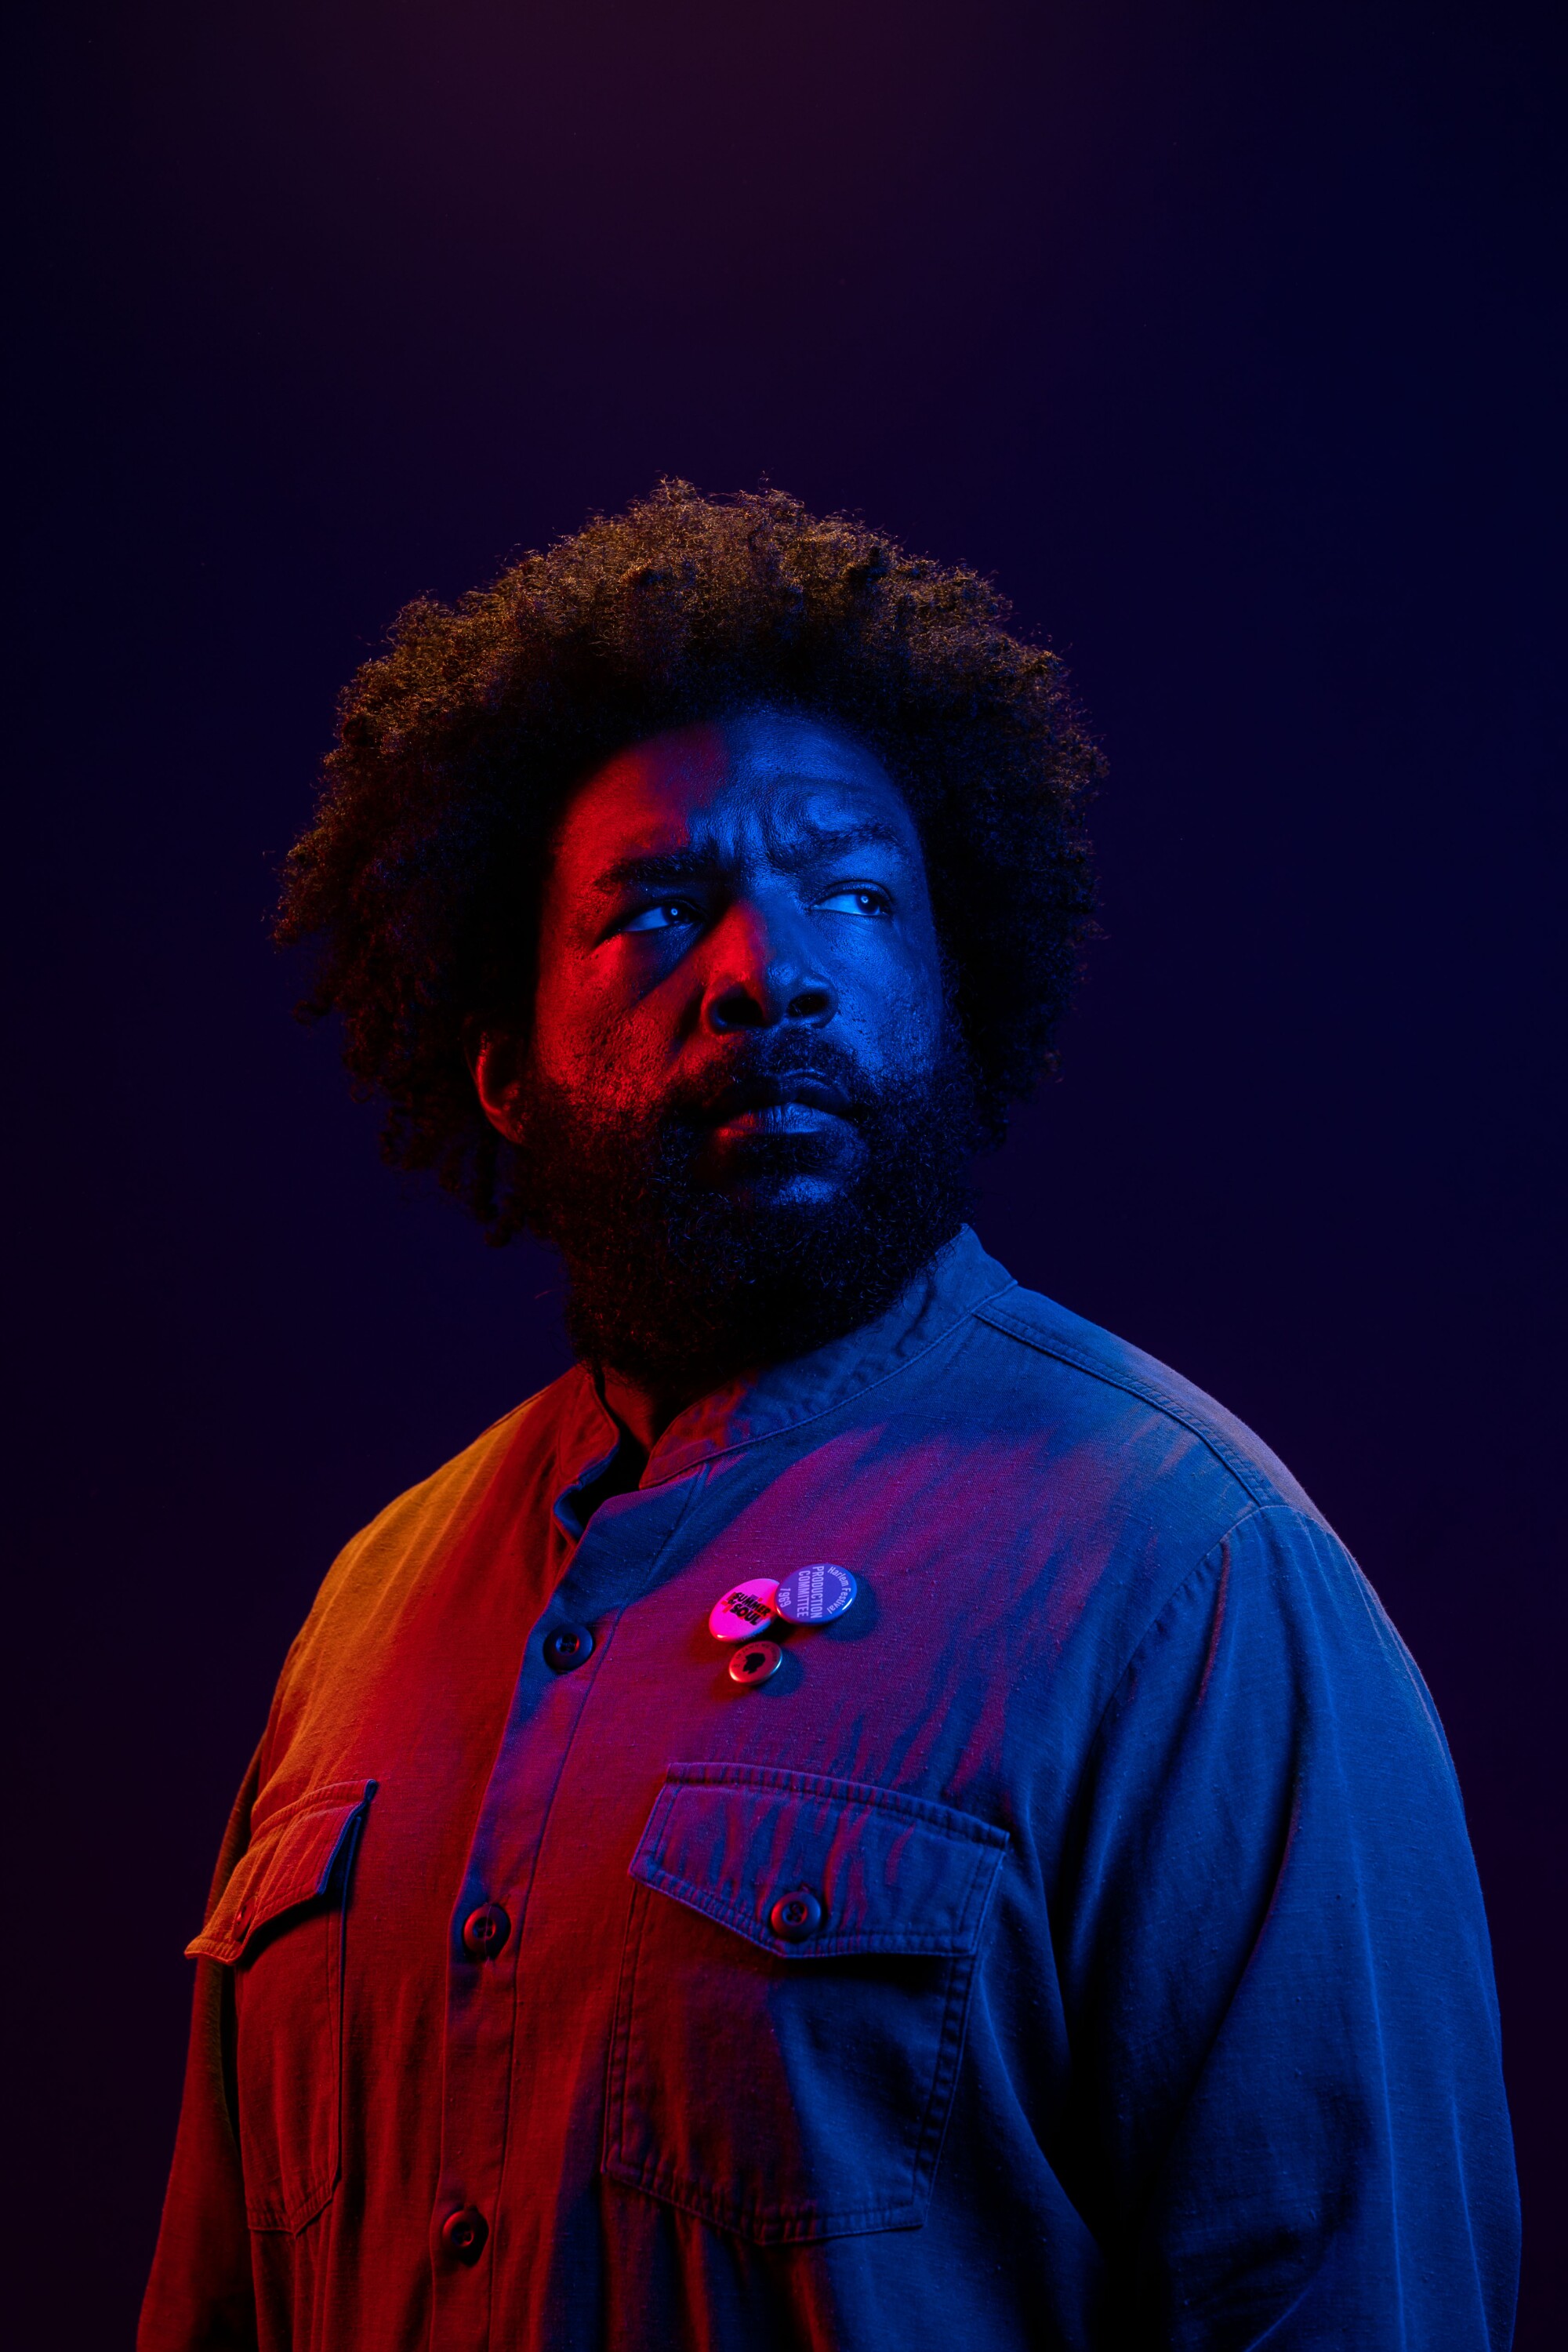 A man poses for a portrait under red and blue lighting.